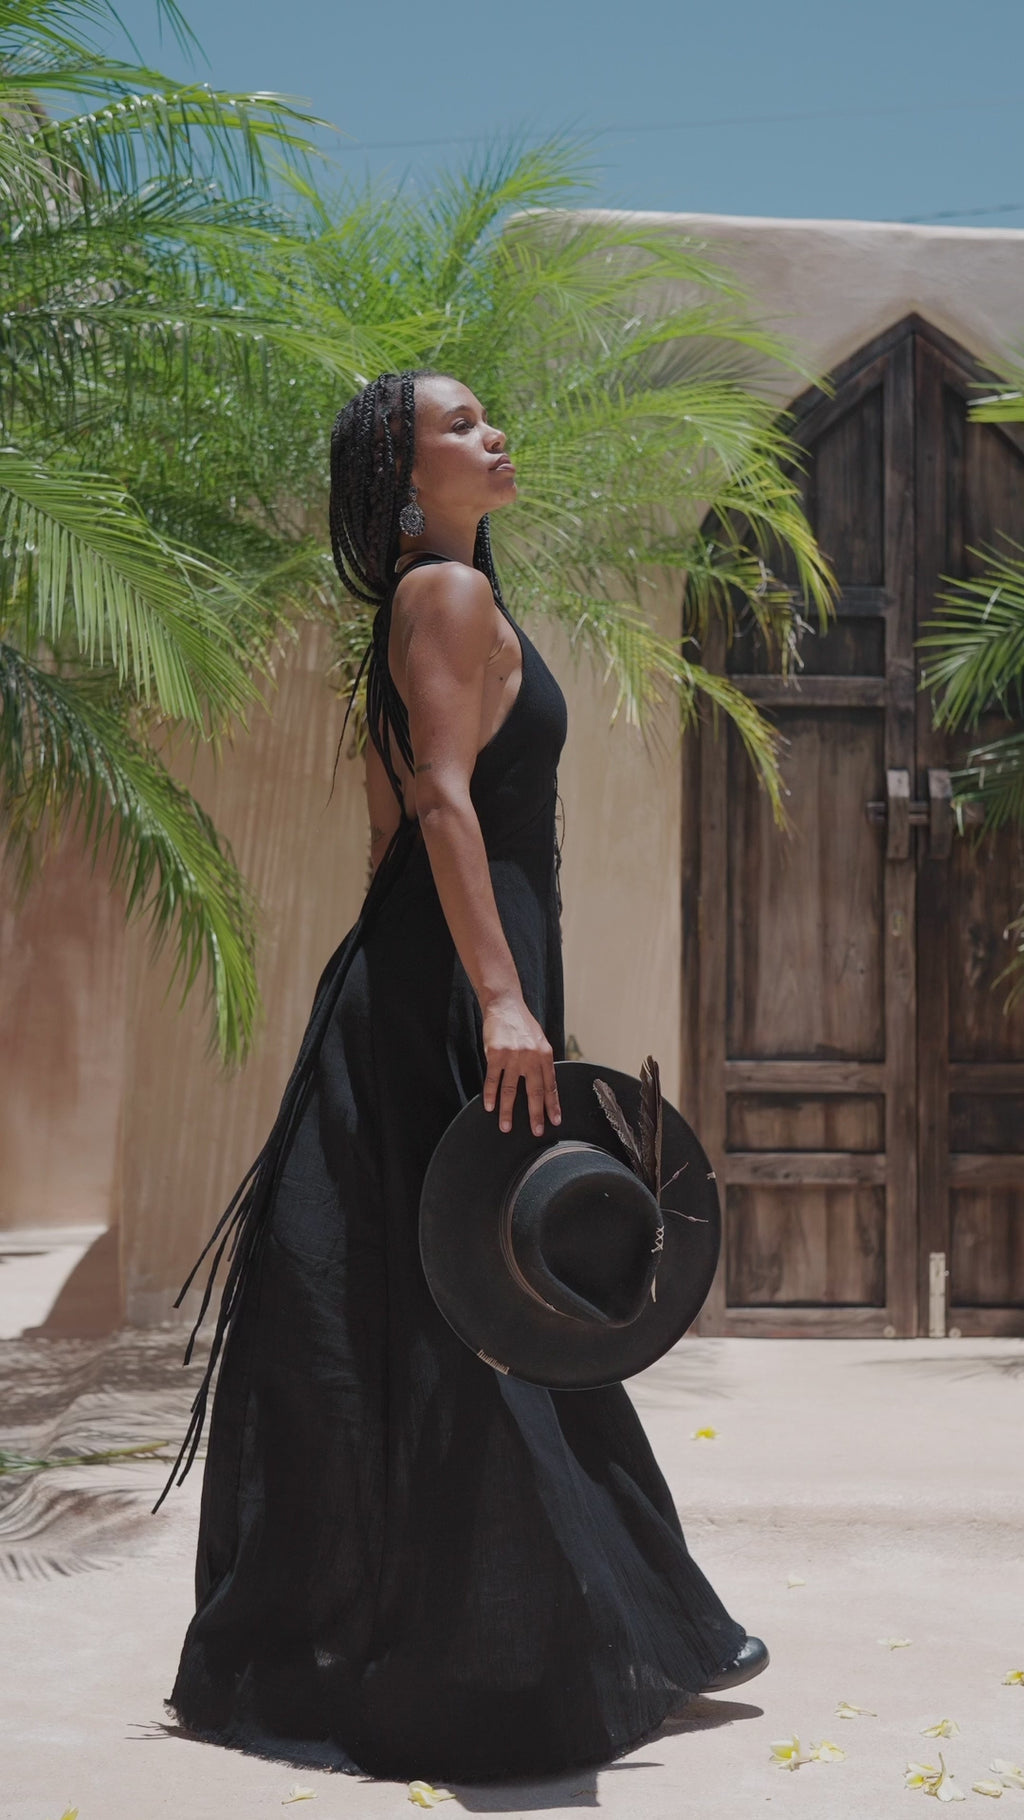 Step up your wardrobe game with the Black Goddess Dress from Aya Sacred Wear.